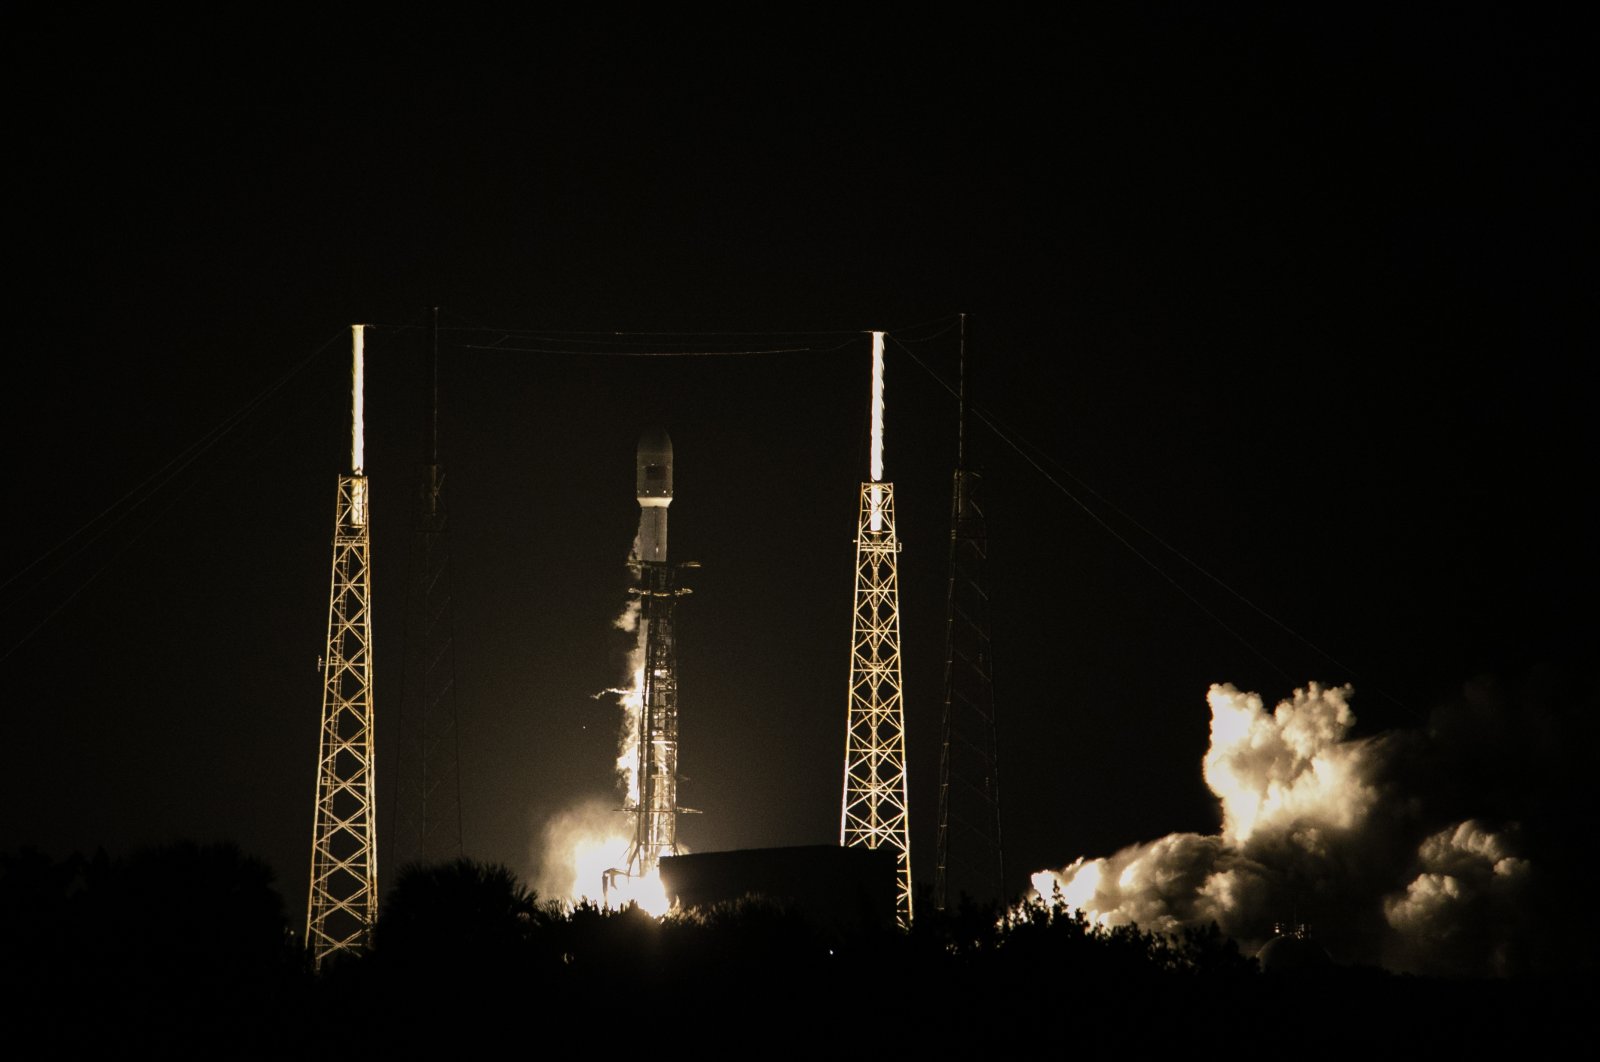 Turkey's new satellite Türksat 5A, carried by a SpaceX Falcon 9 rocket, launches from Cape Canaveral Space Force Station, in Cape Canaveral, Florida, U.S., Jan. 7, 2020. (AA Photo)